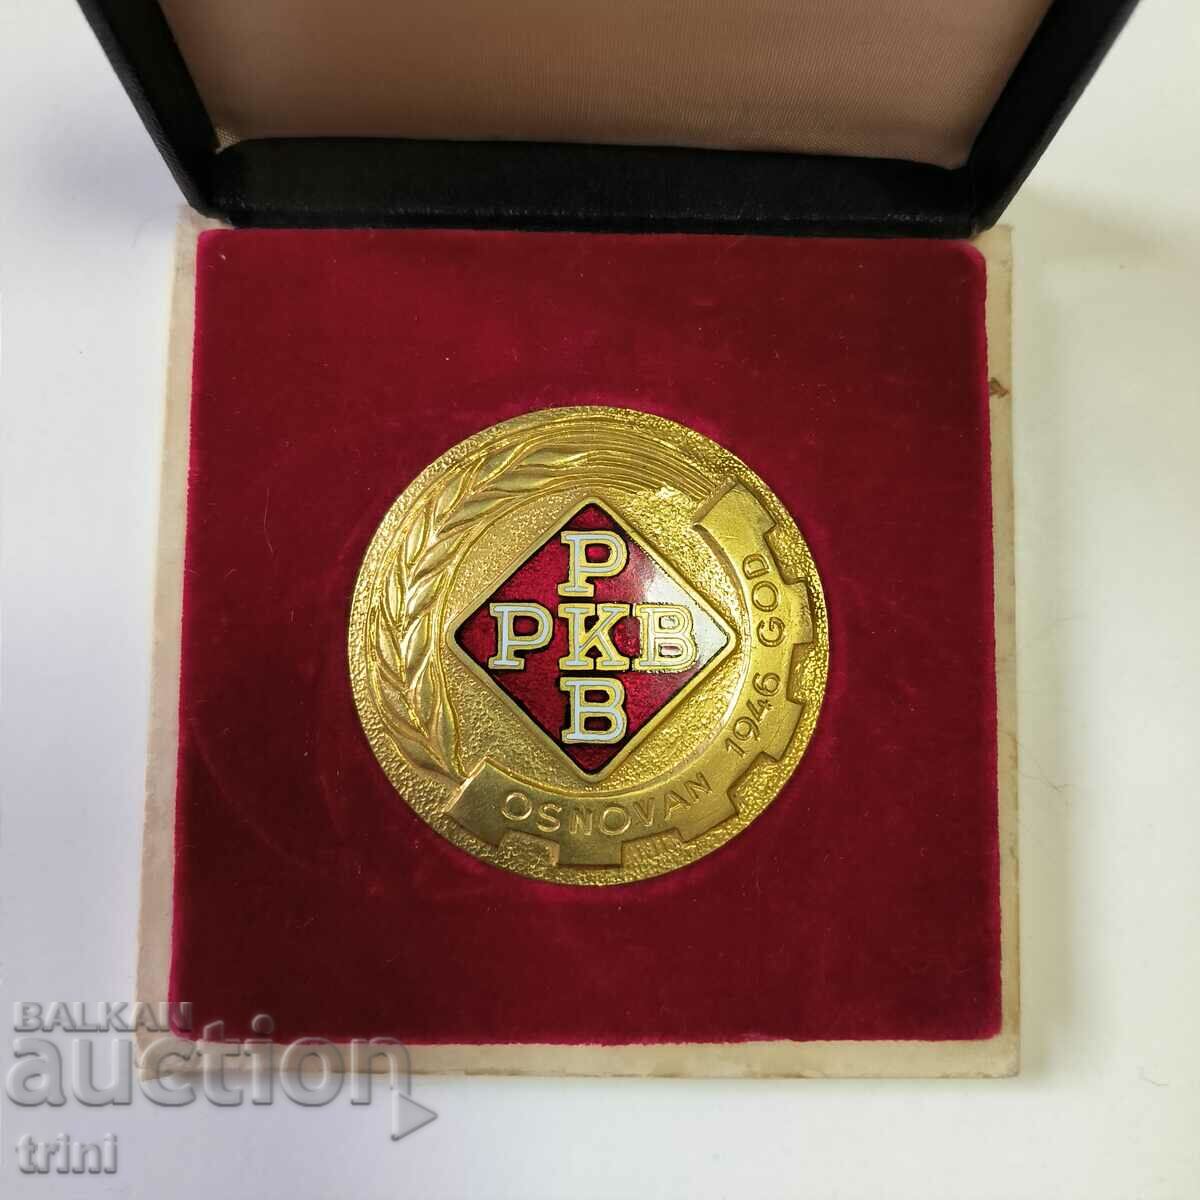 Yugoslavia Medal for 20 years of service in RKB with number